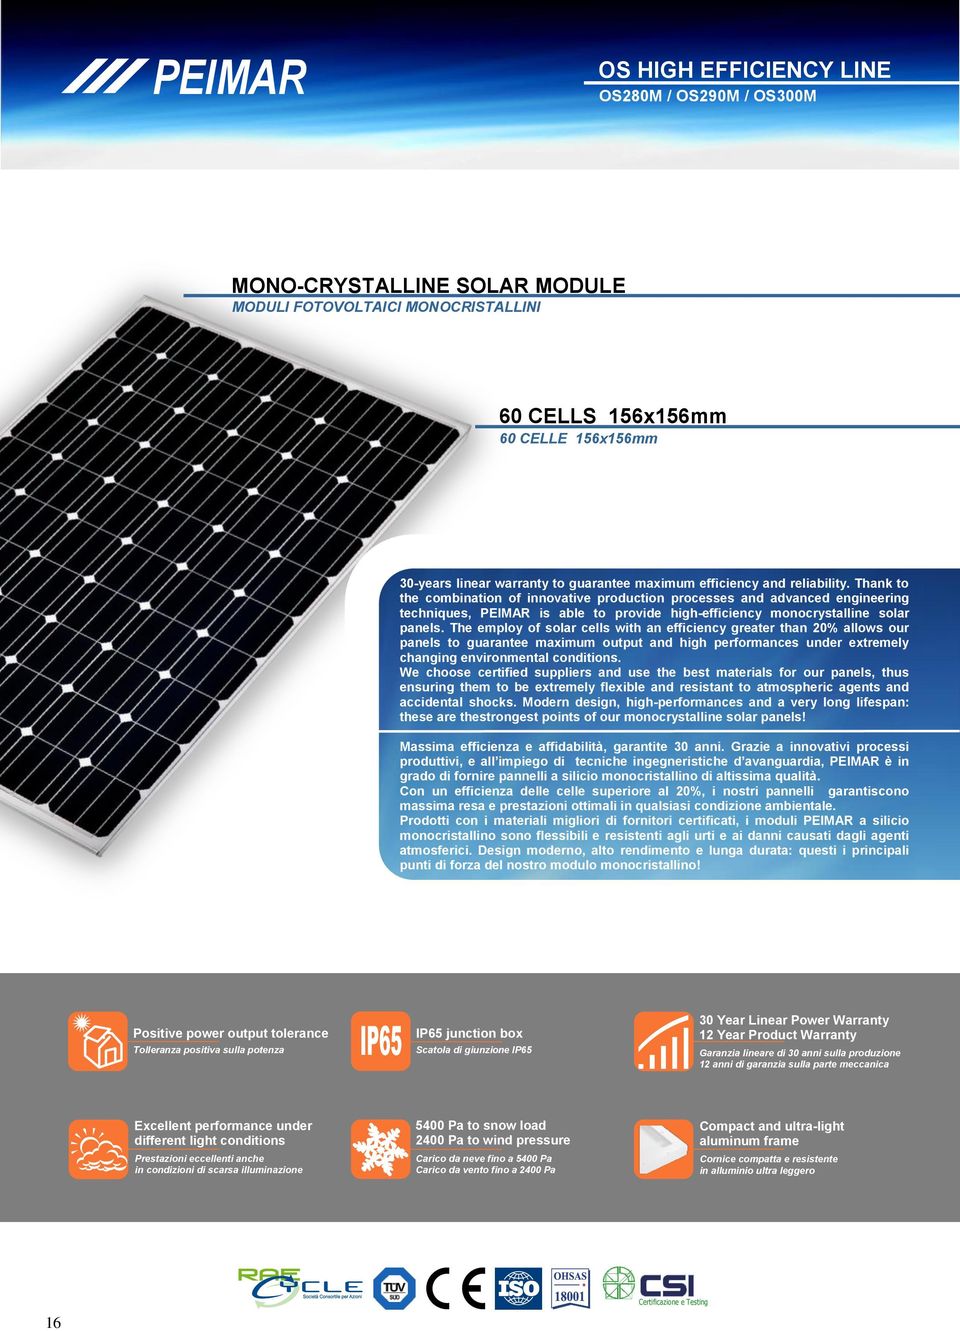 The employ of solar cells with an efficiency greater than 2% allows our panels to guarantee maximum output and high performances under extremely changing environmental conditions.